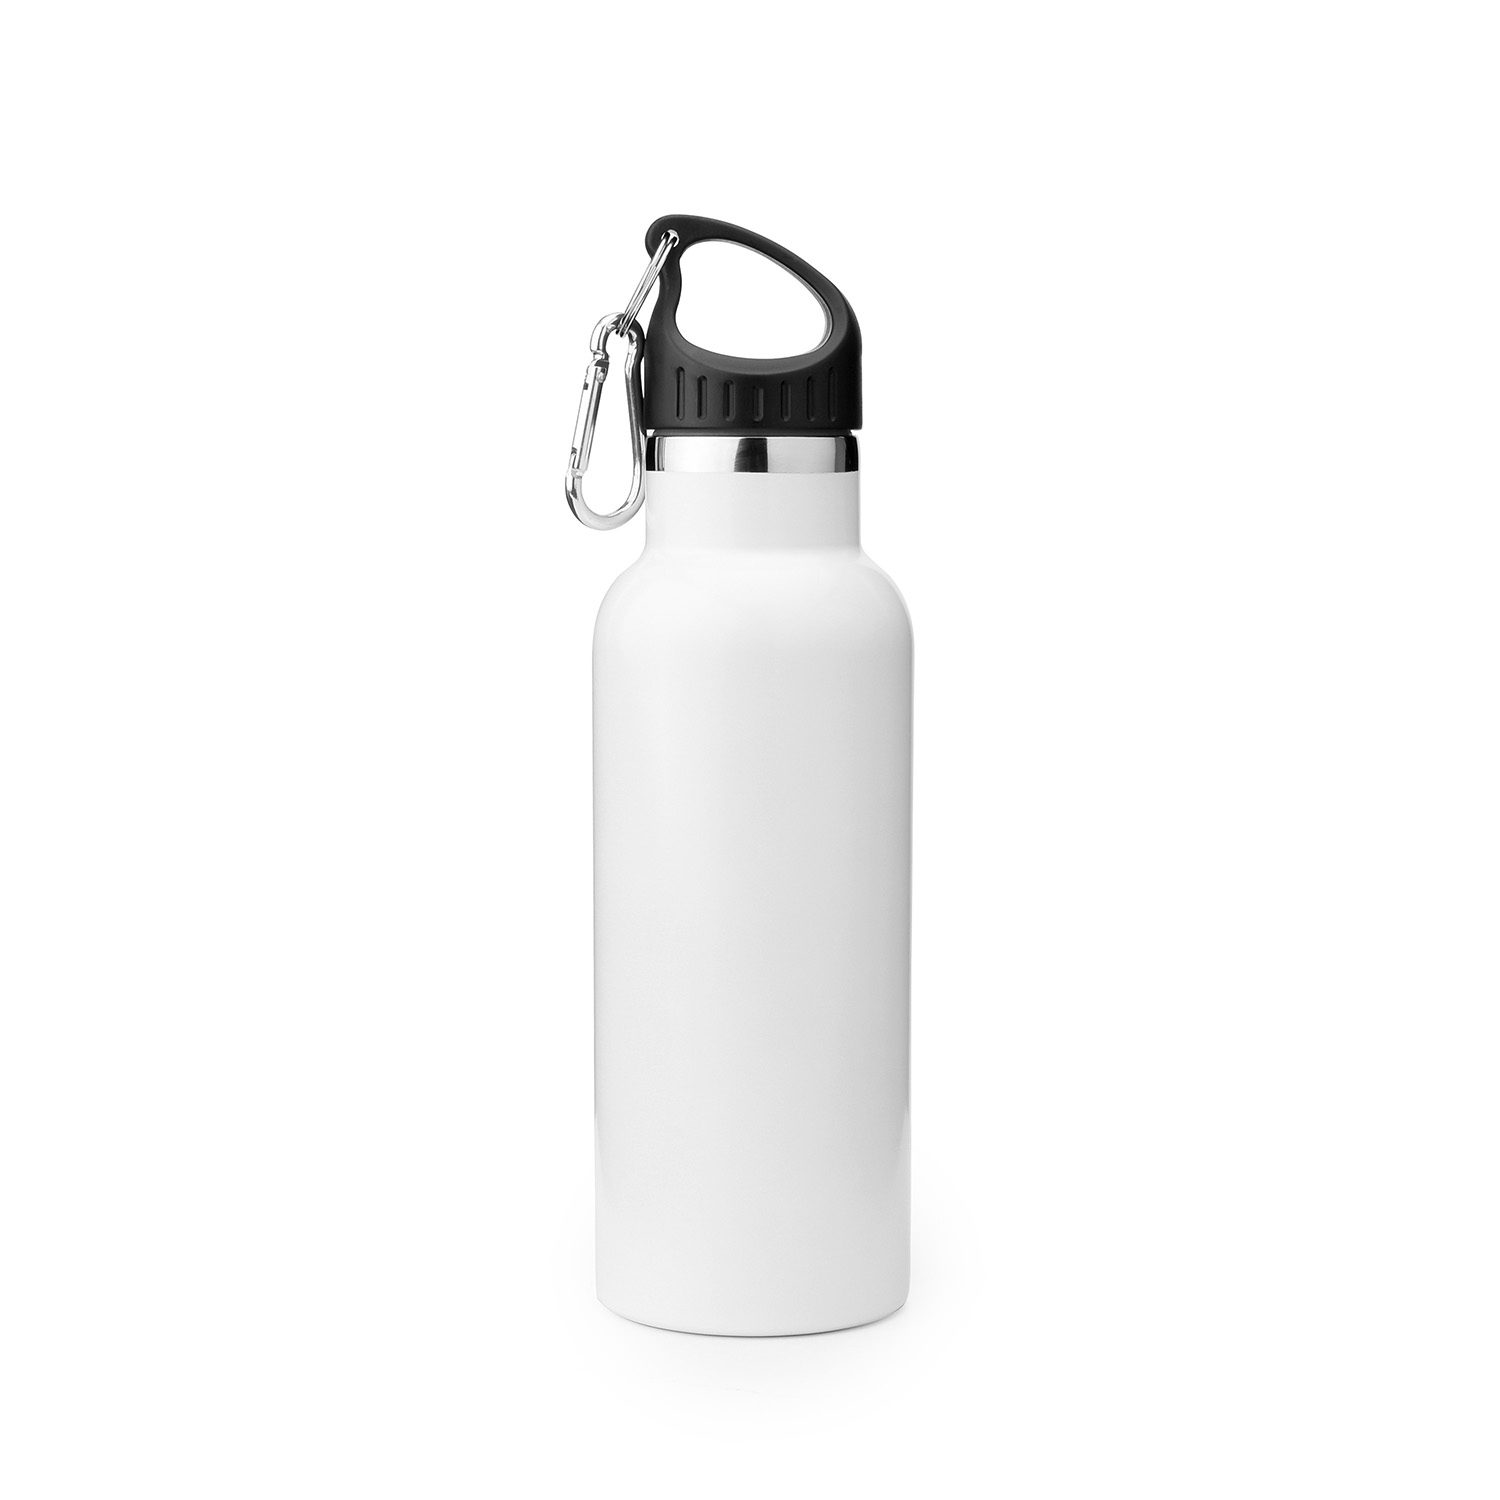 Stainless Steel Reusable ECO-Friendly Water Bottle with Carabiner